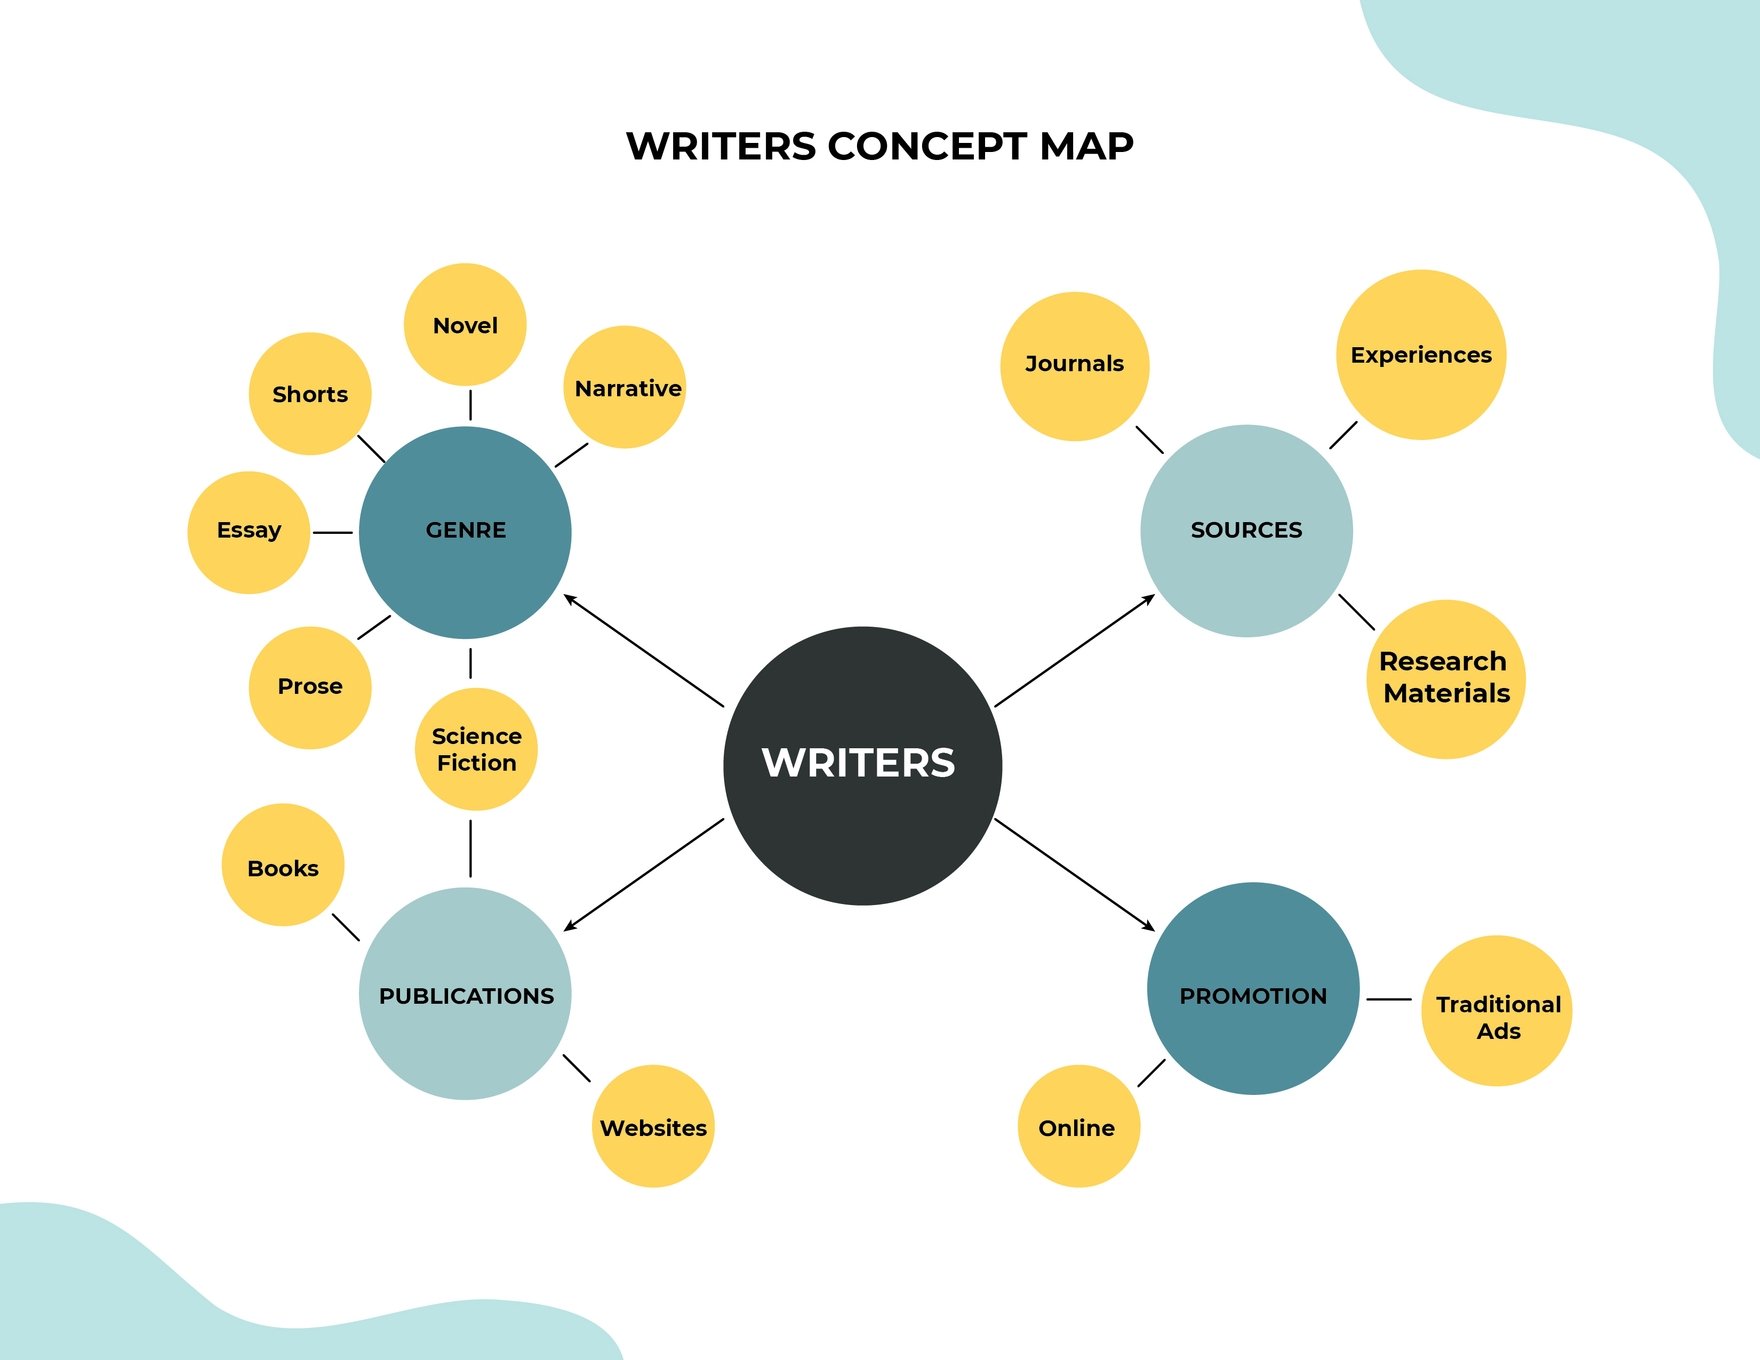 Microsoft Word Concept Map Template, Find your perfect word template ...